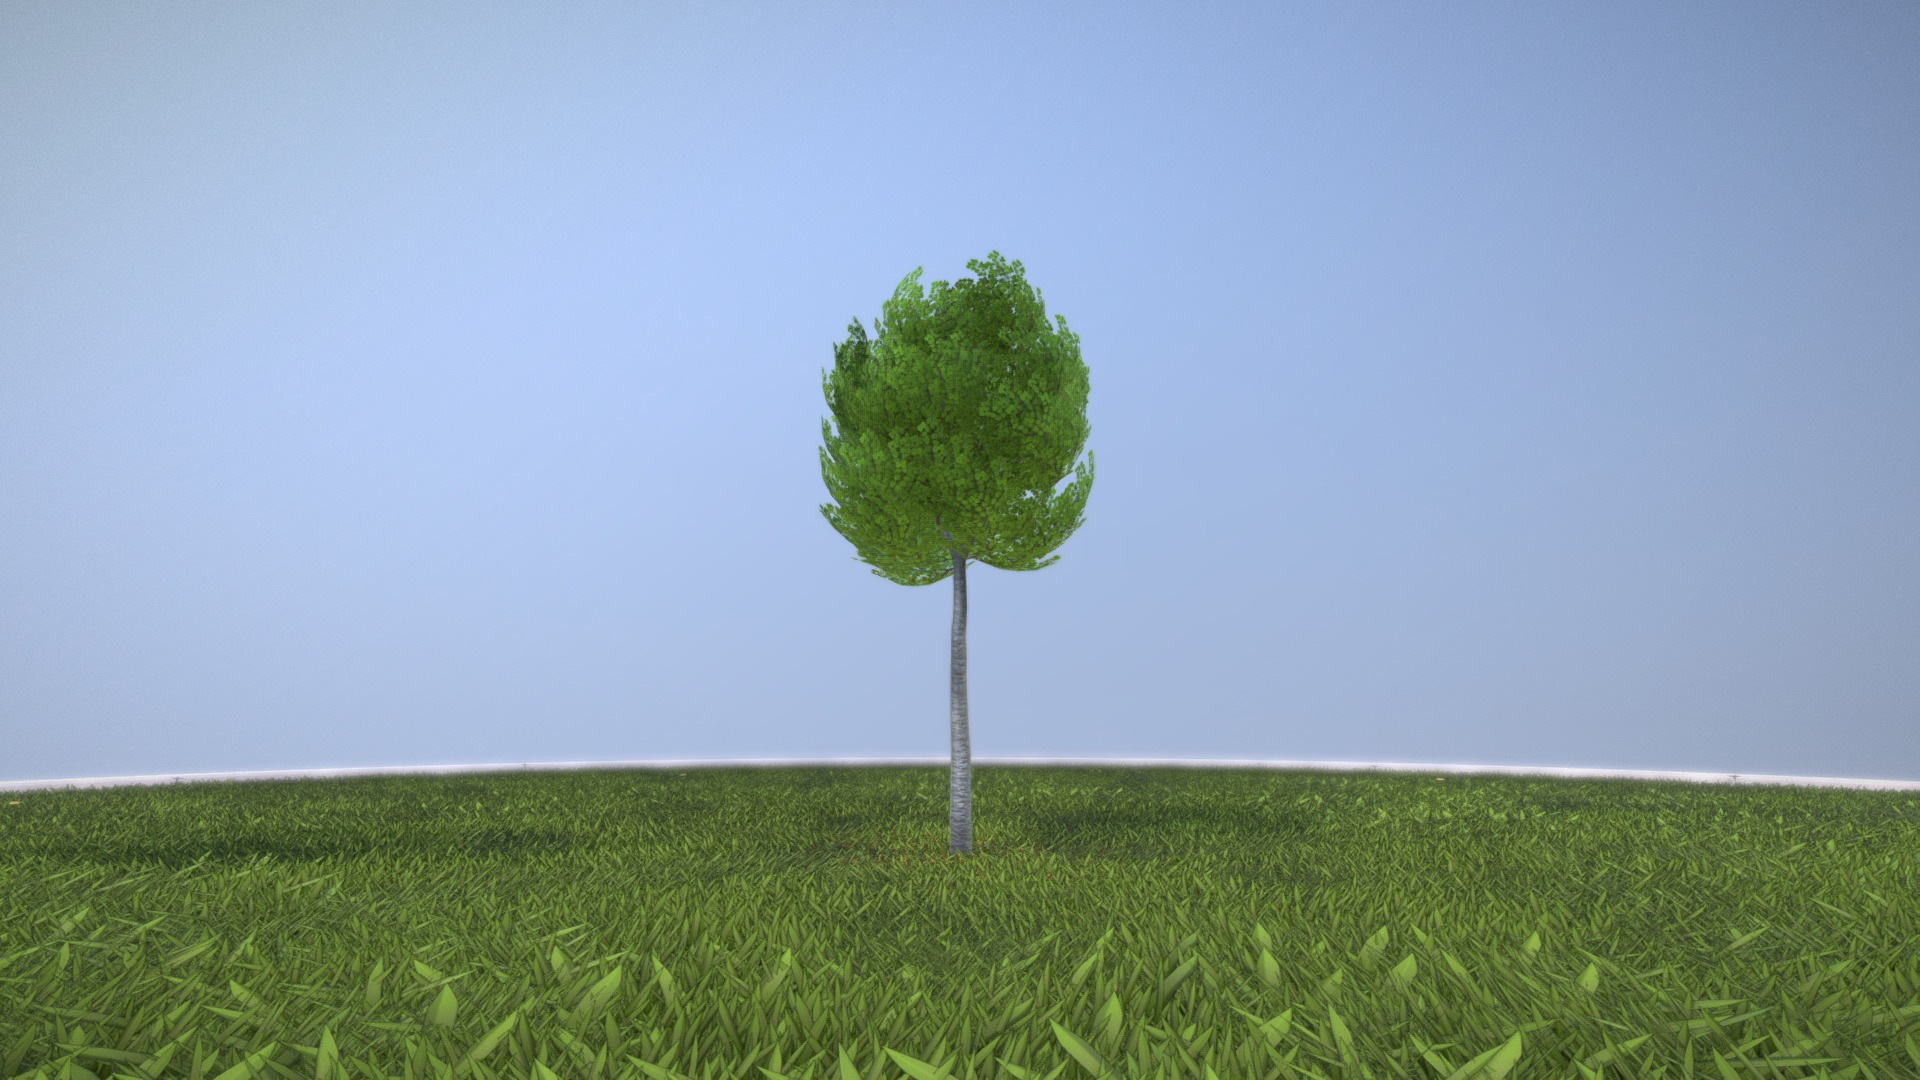 3D model Linde 4 Meter – Version 2 - This is a 3D model of the Linde 4 Meter - Version 2. The 3D model is about a tree in a field.